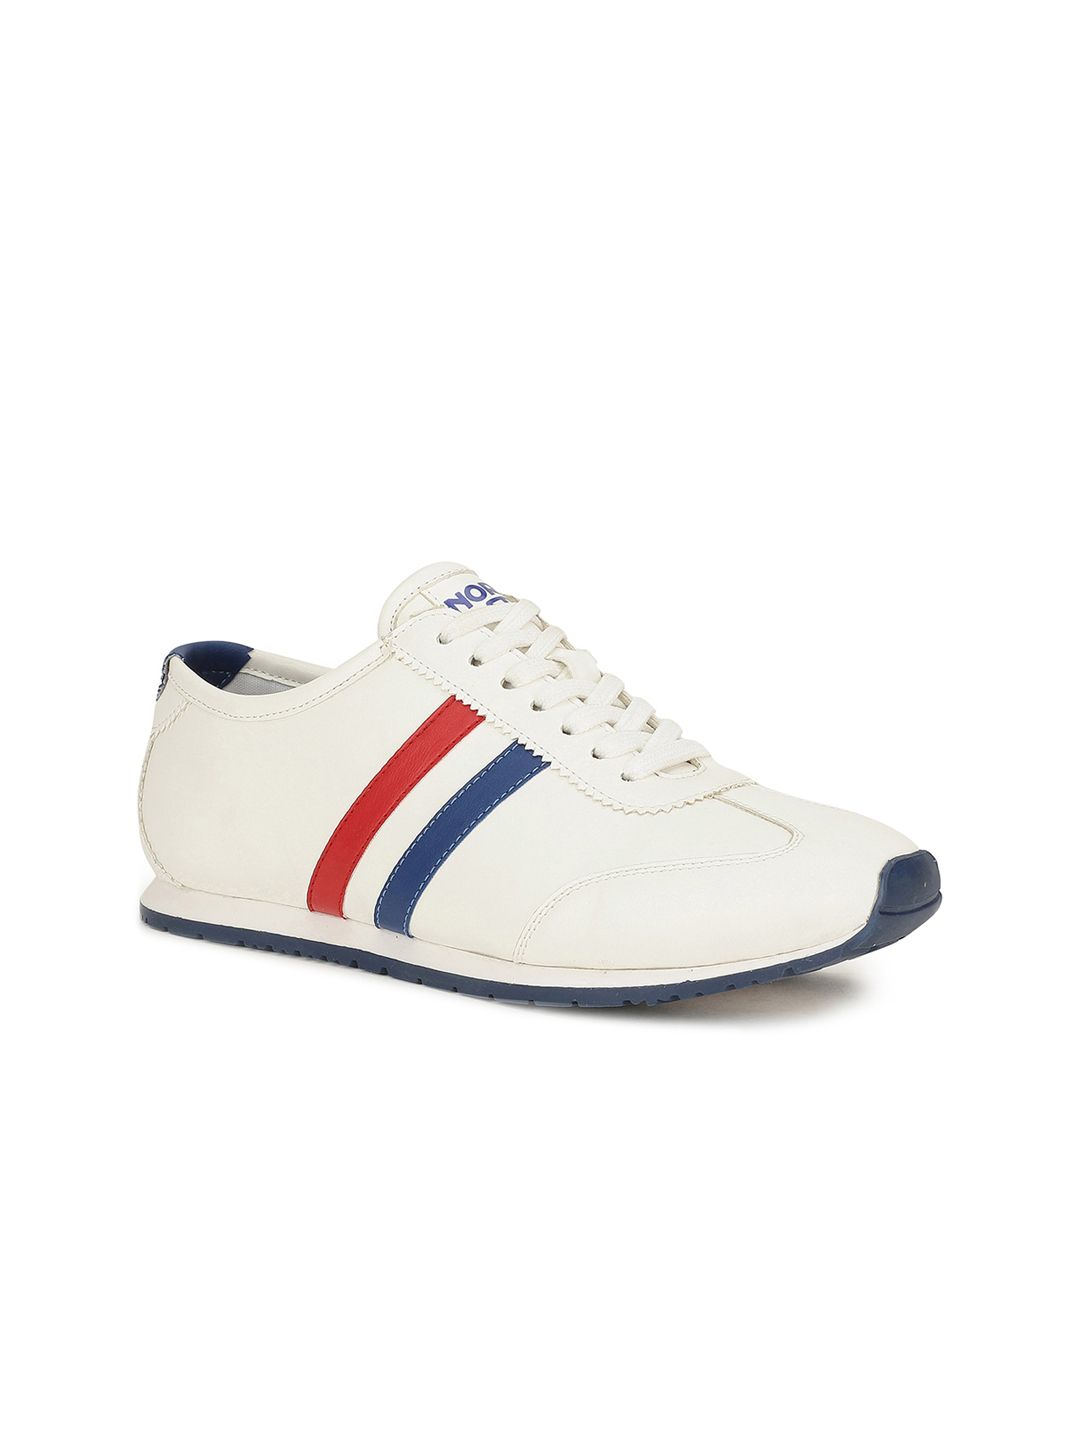 North Star Women  Striped PU Sneakers Price in India